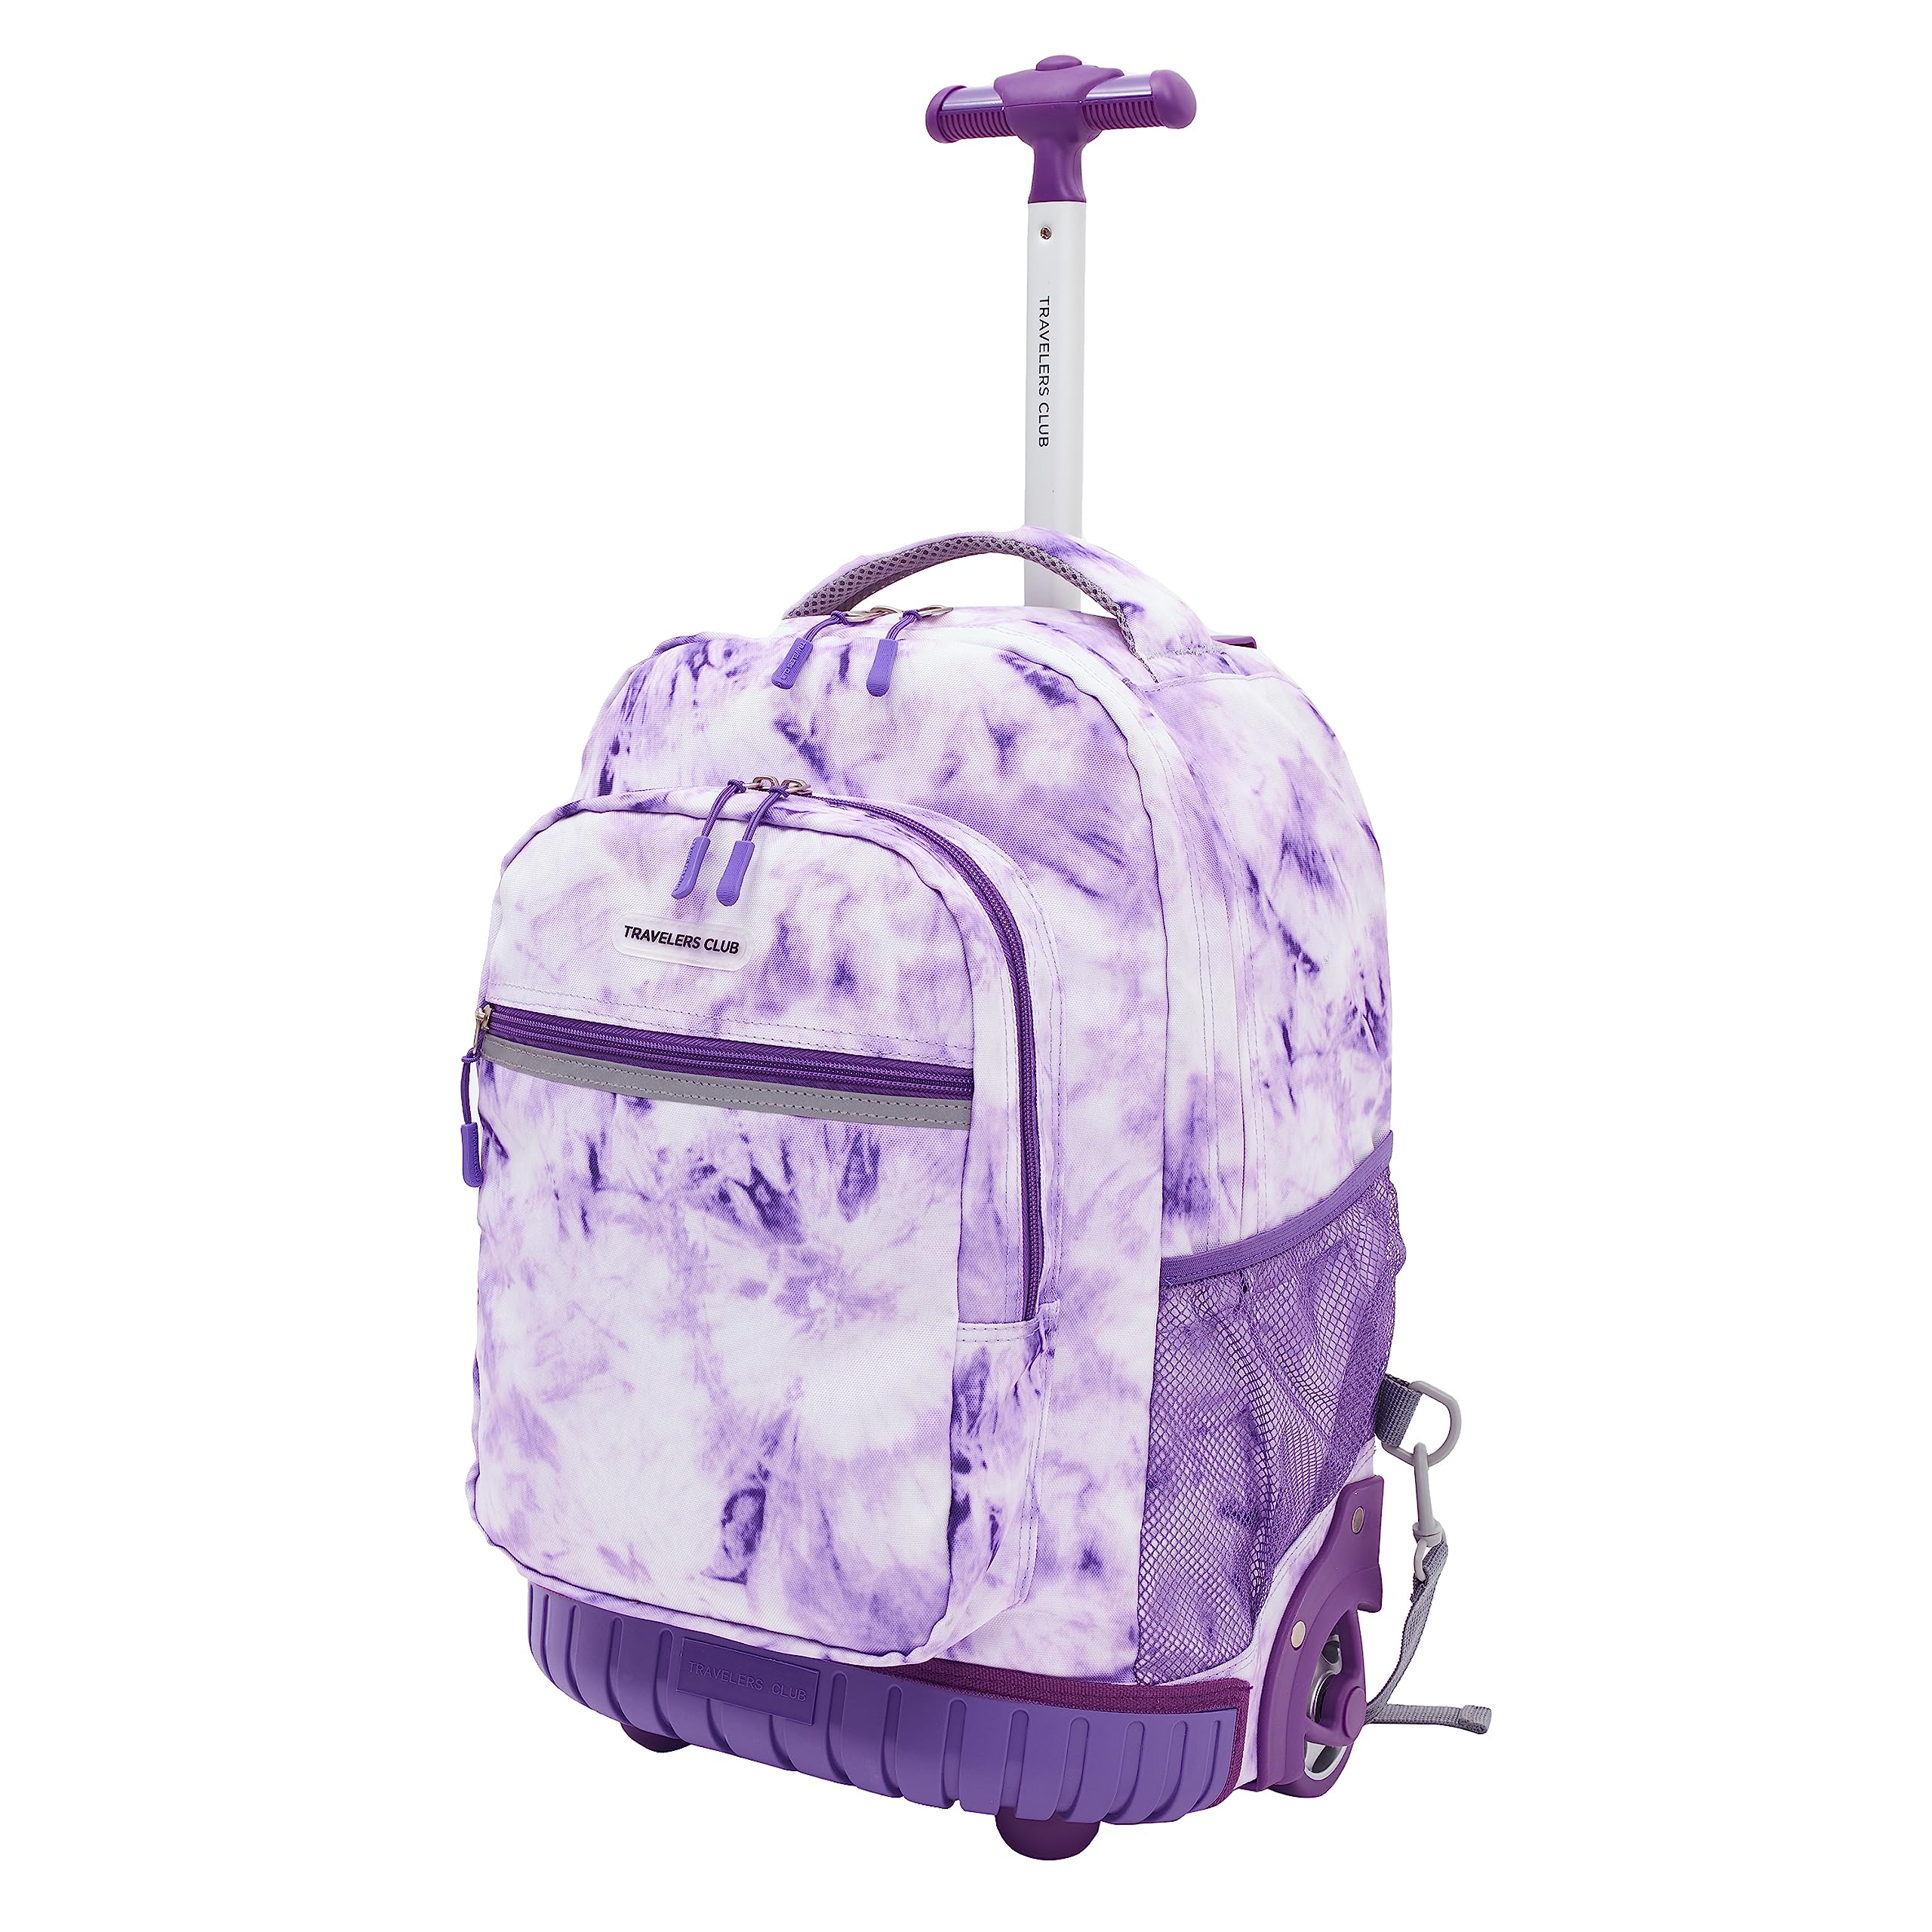 Travelers Club Rolling Backpack with Shoulder Straps, Purple Tye, 18-Inch